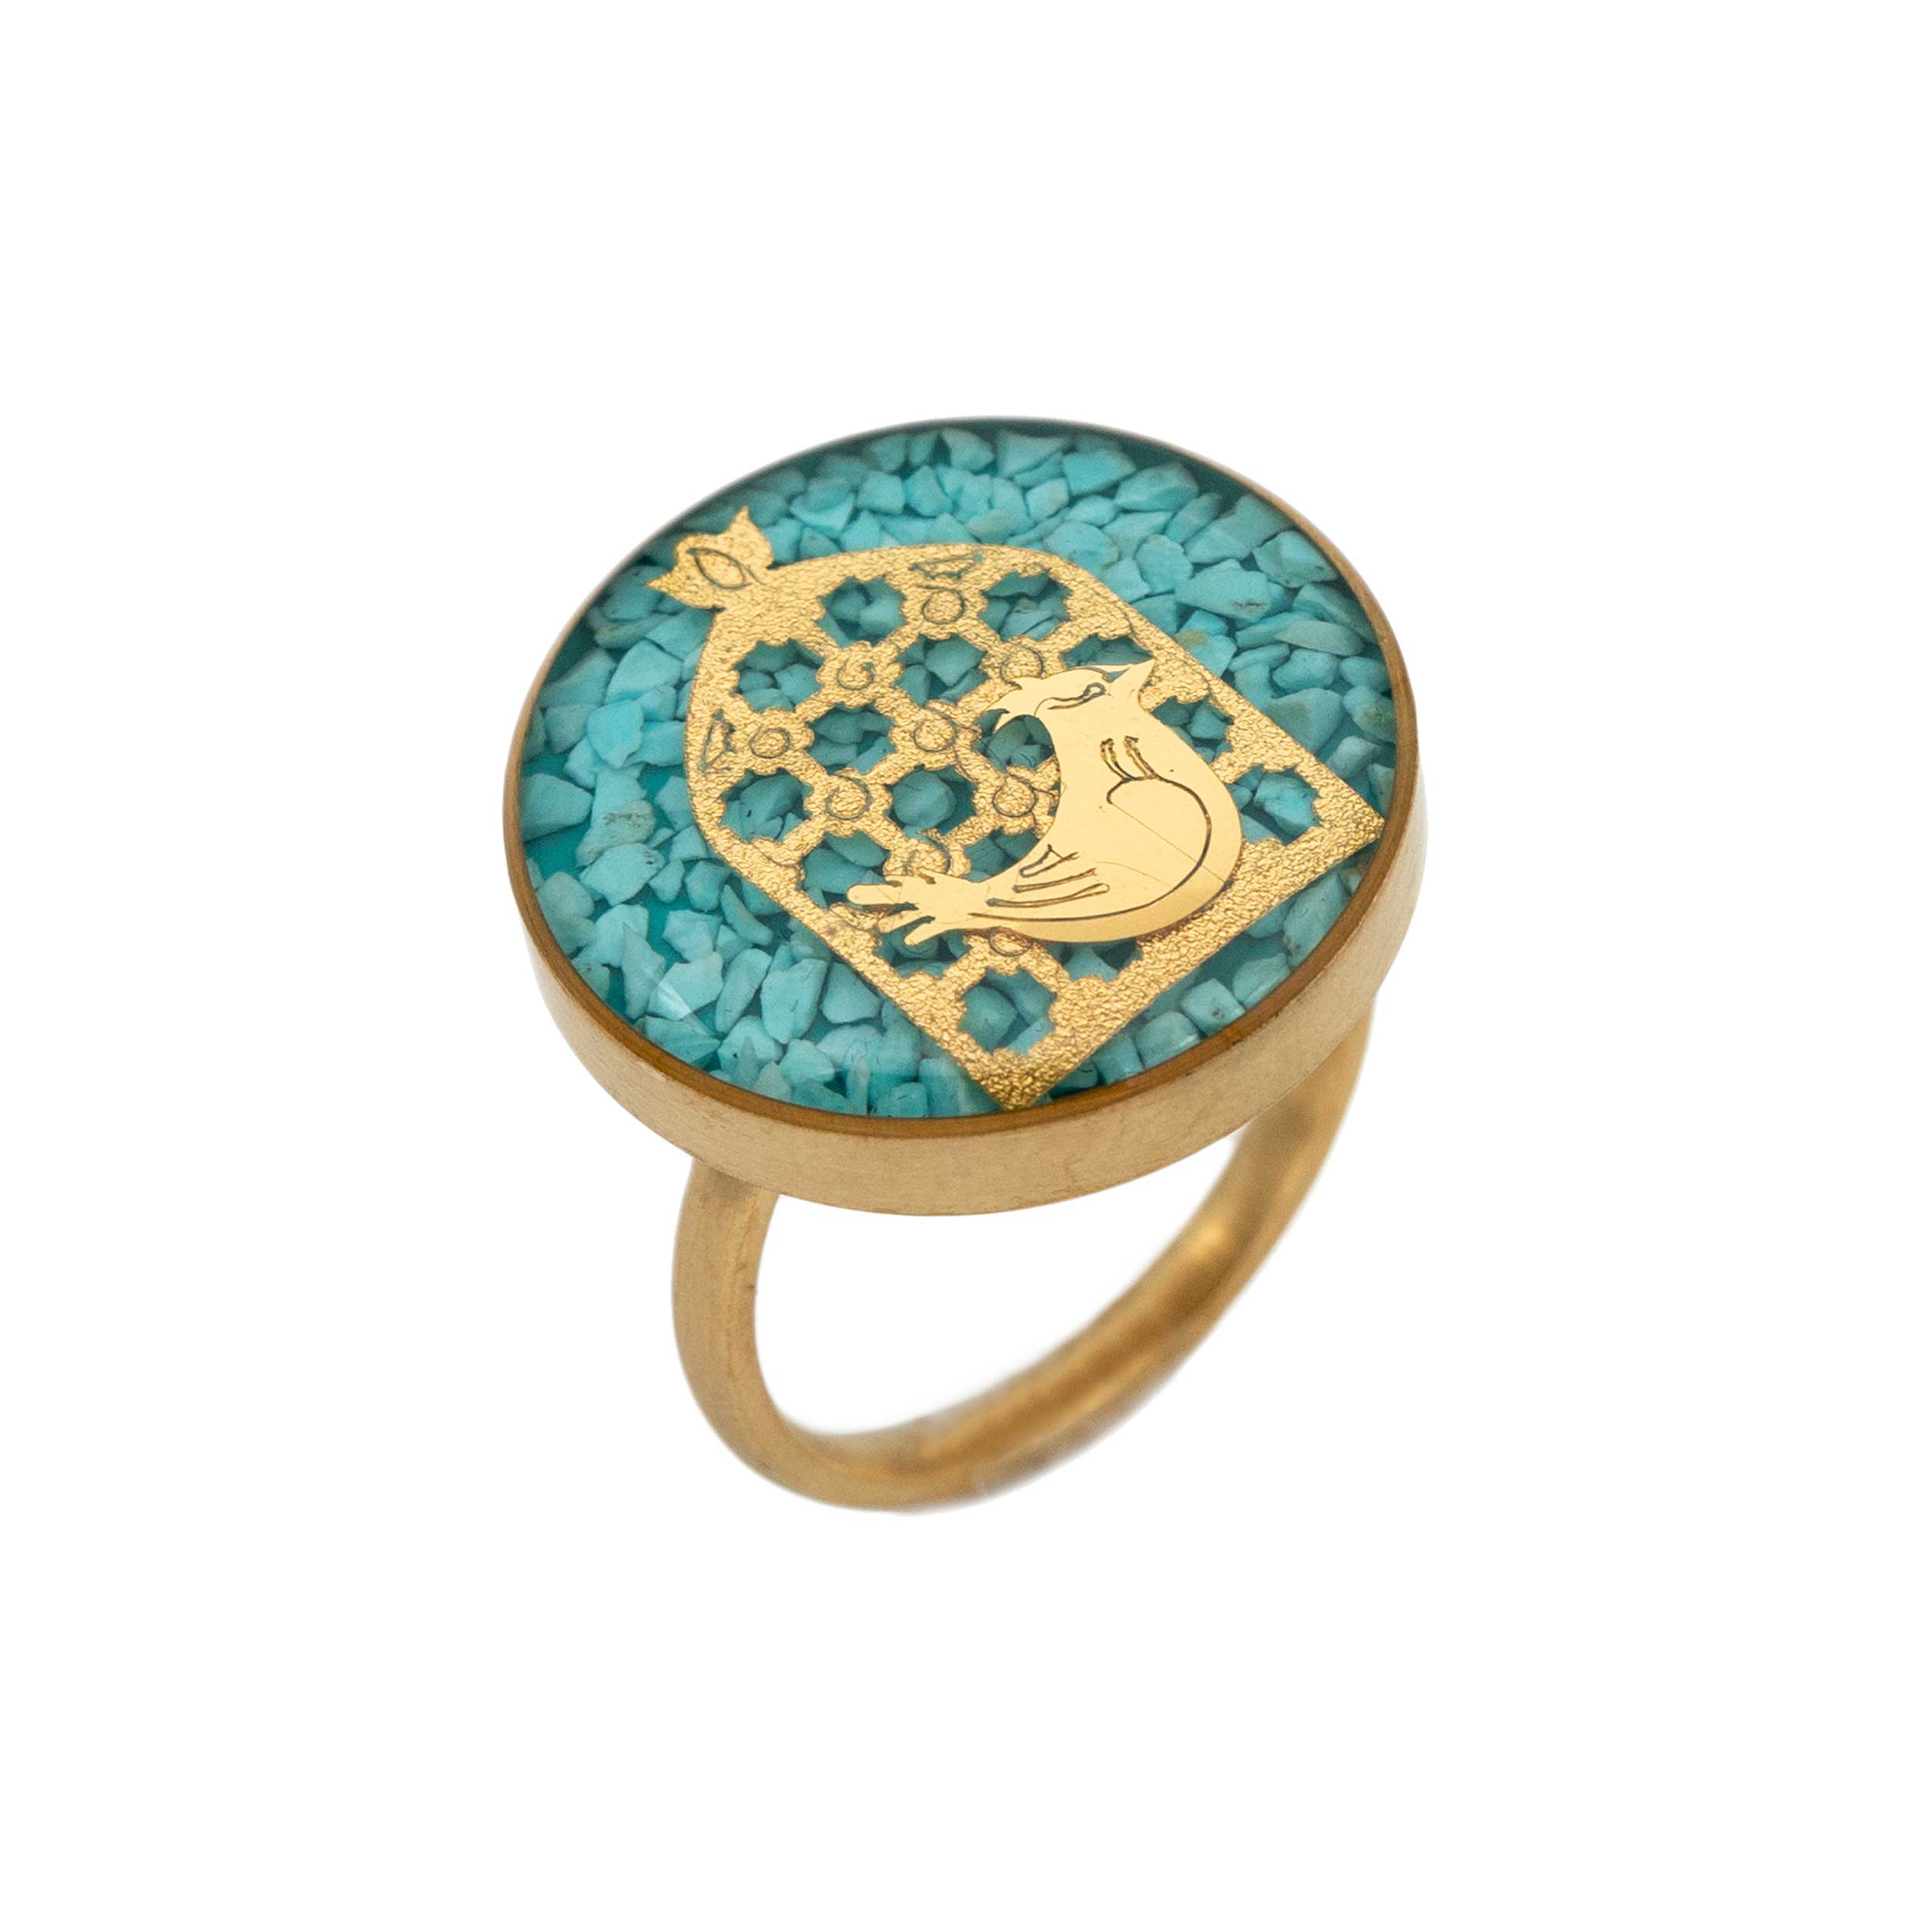 Turquoise ring and gold leaf 24 Amen chicken designs